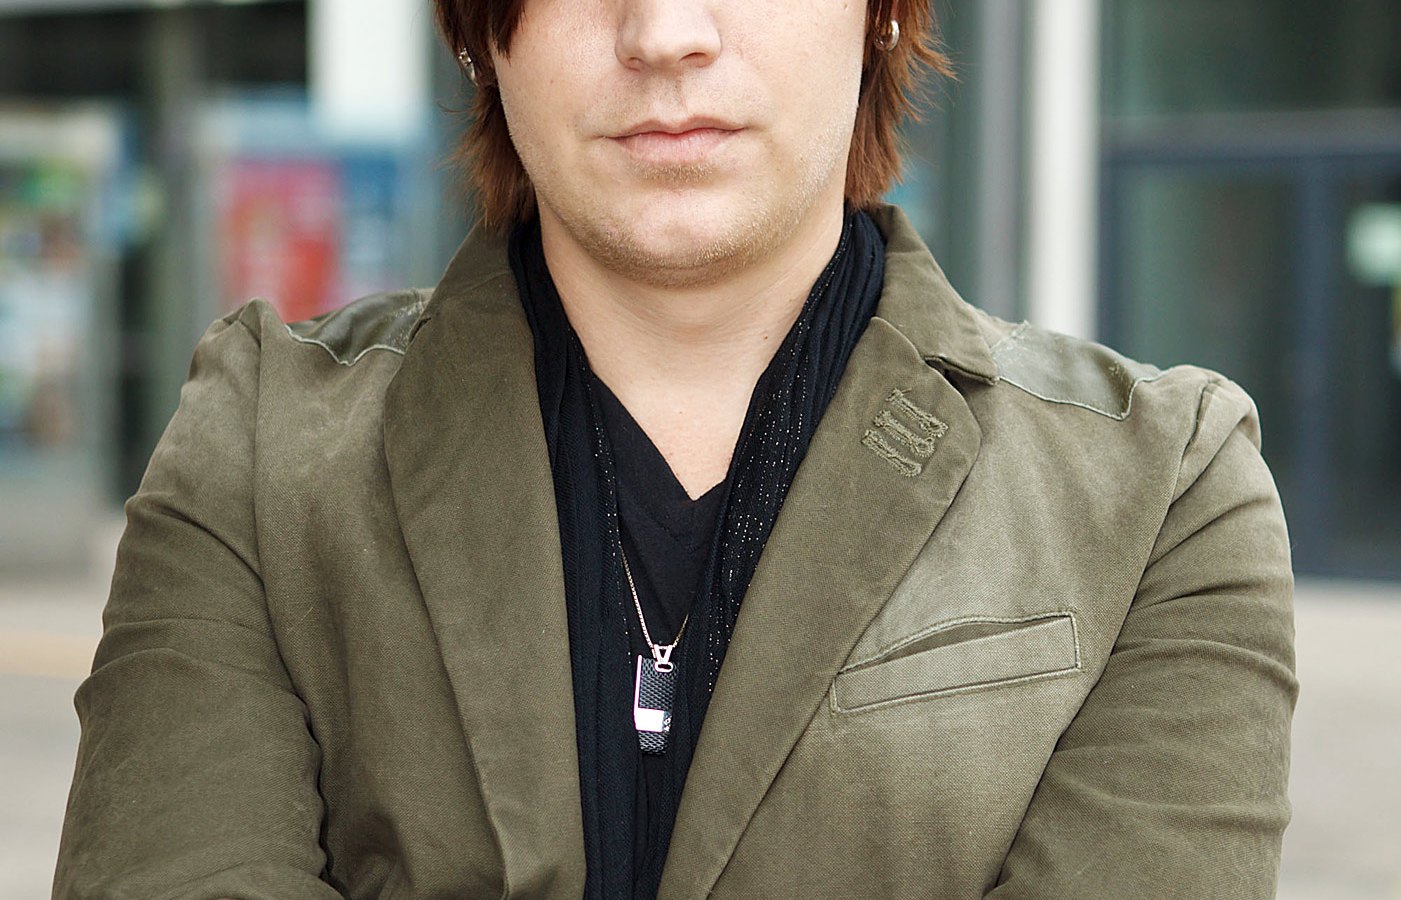 Alex Band of The Calling